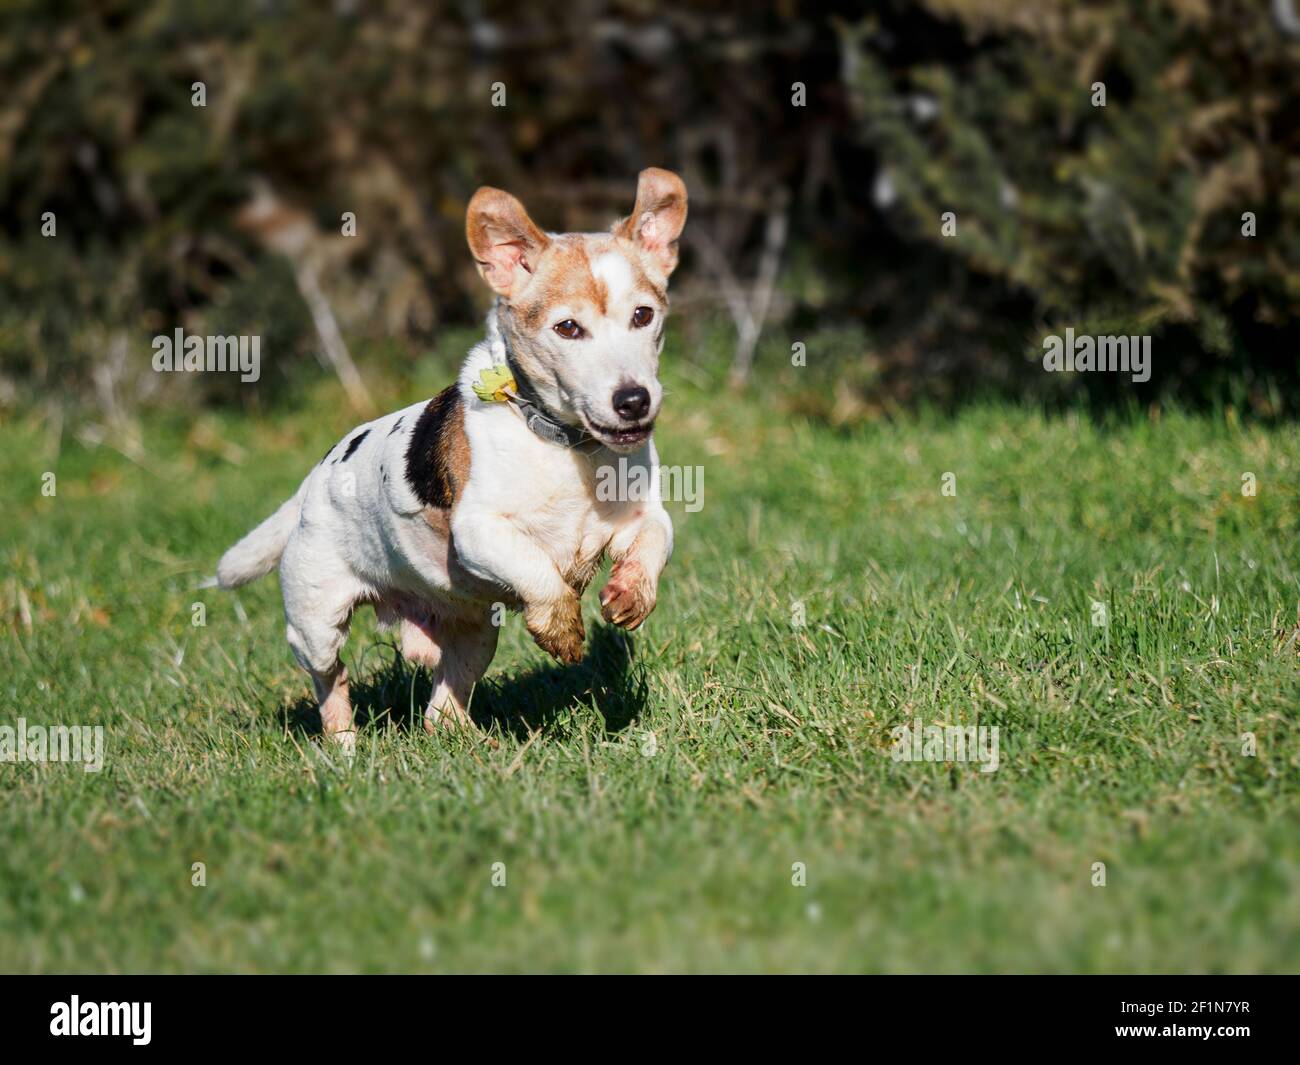 Old Jack Russell Dog Running, Royaume-Uni Banque D'Images